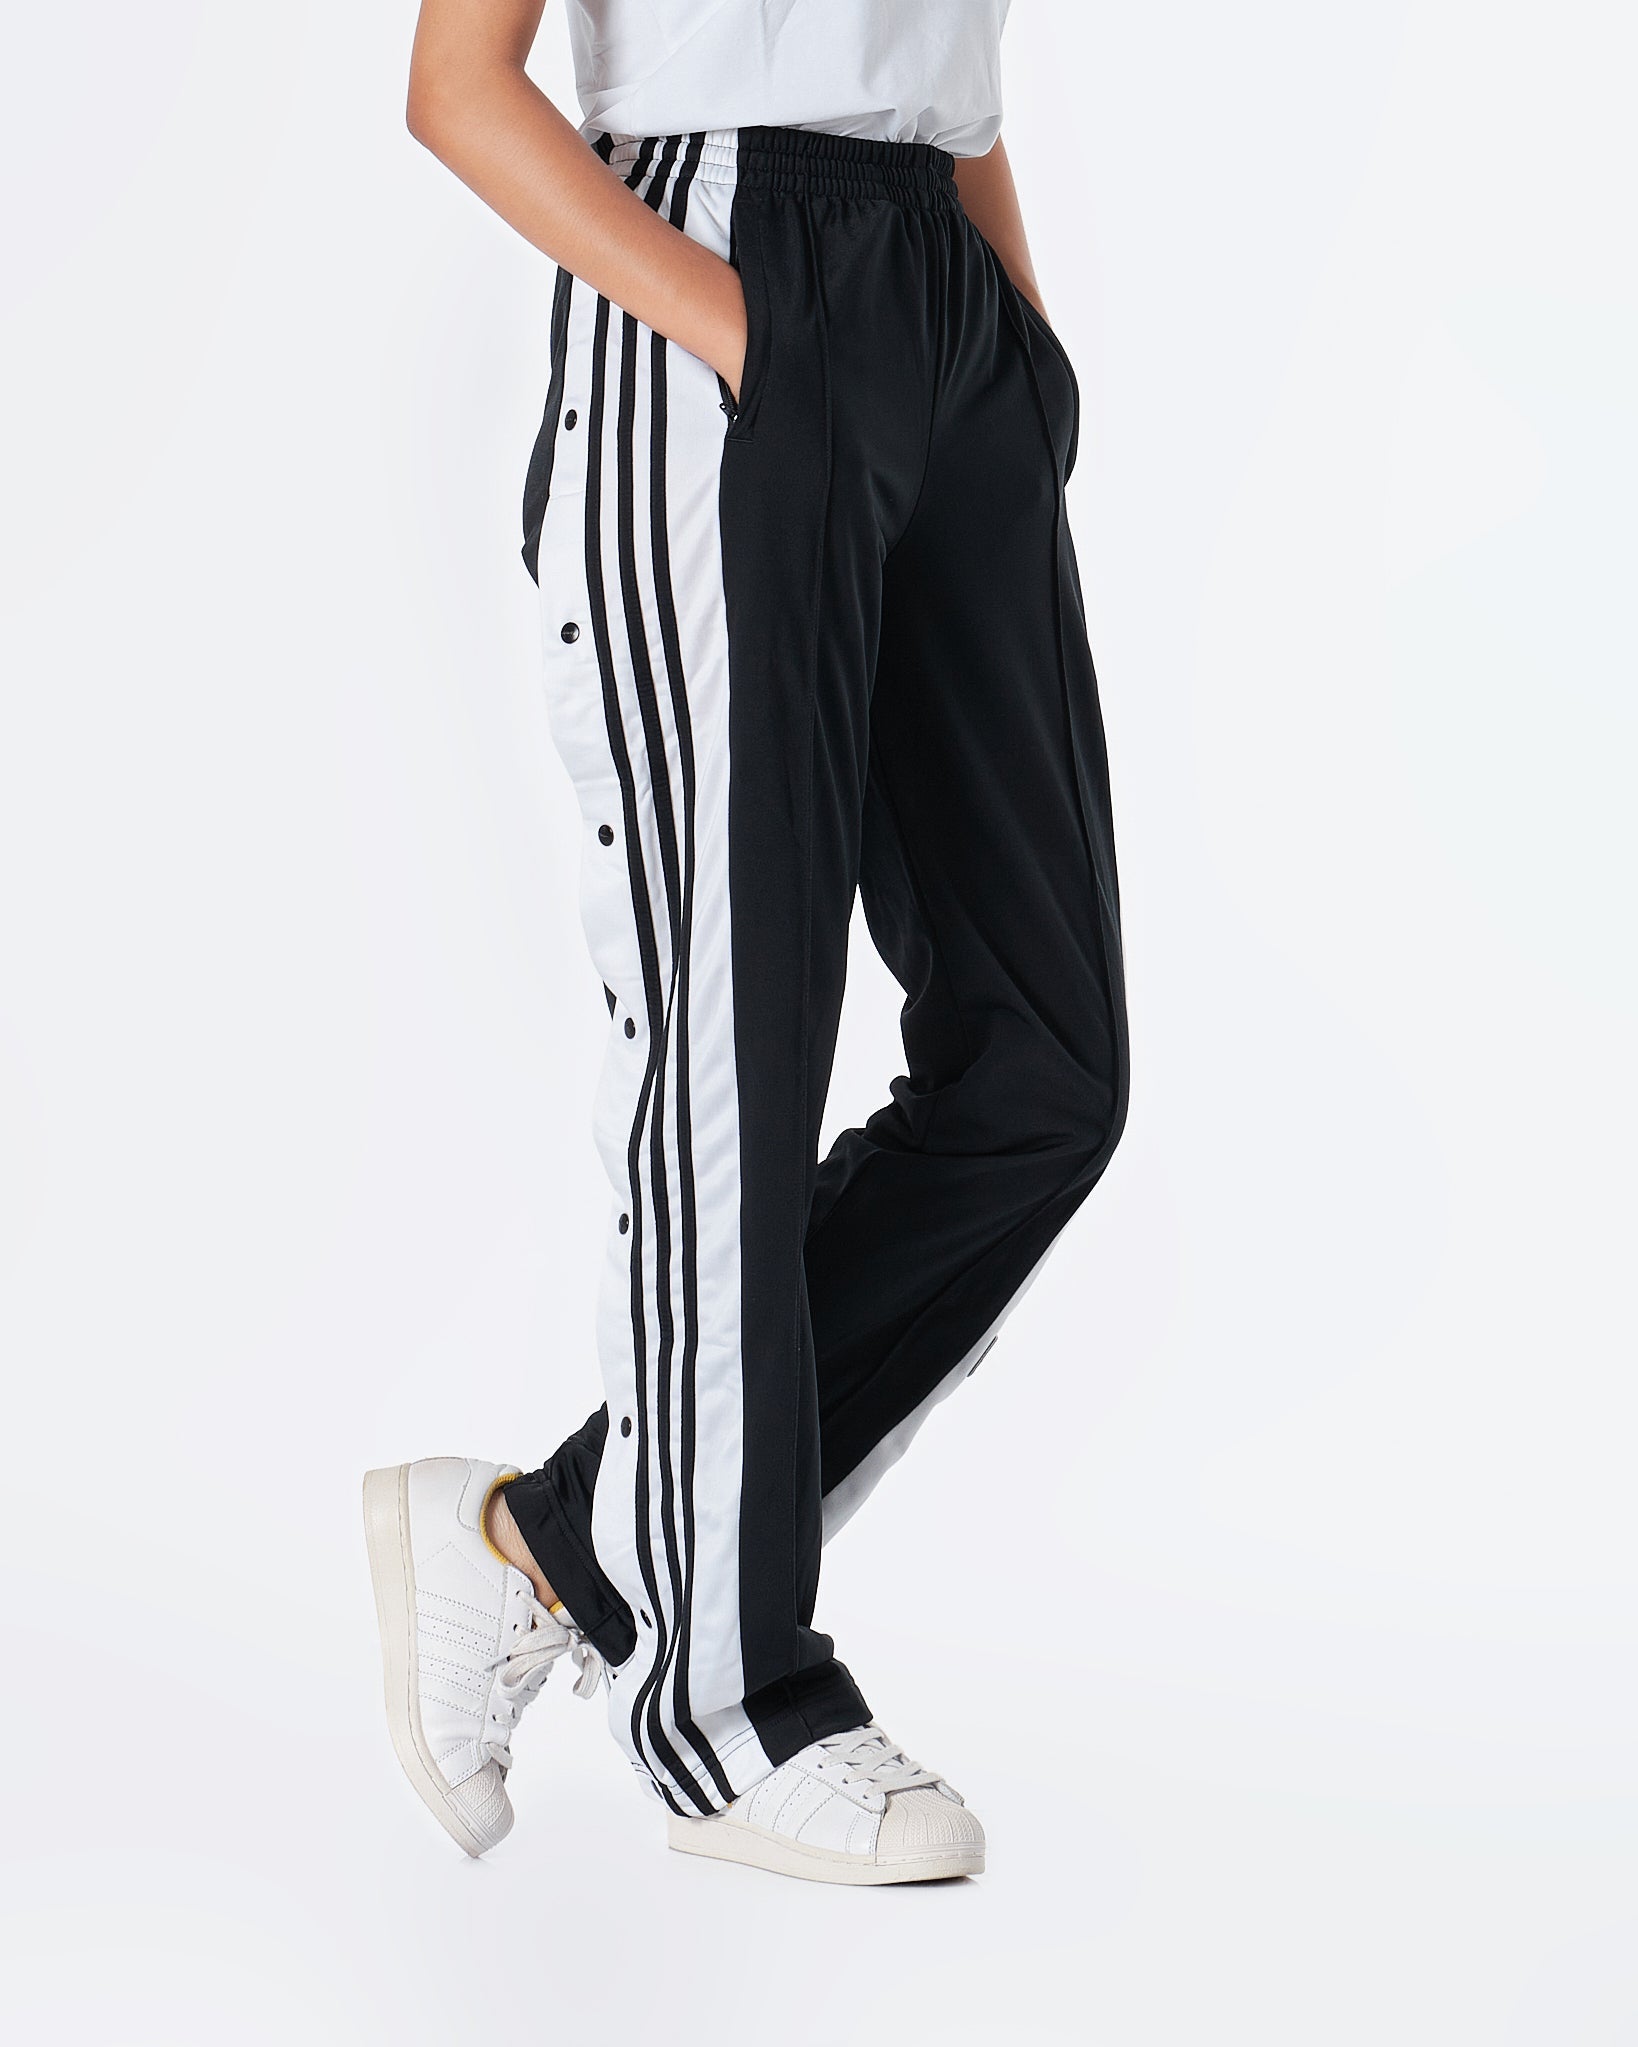 MOI OUTFIT-Classic Adibreak Lady Track Pants 34.90